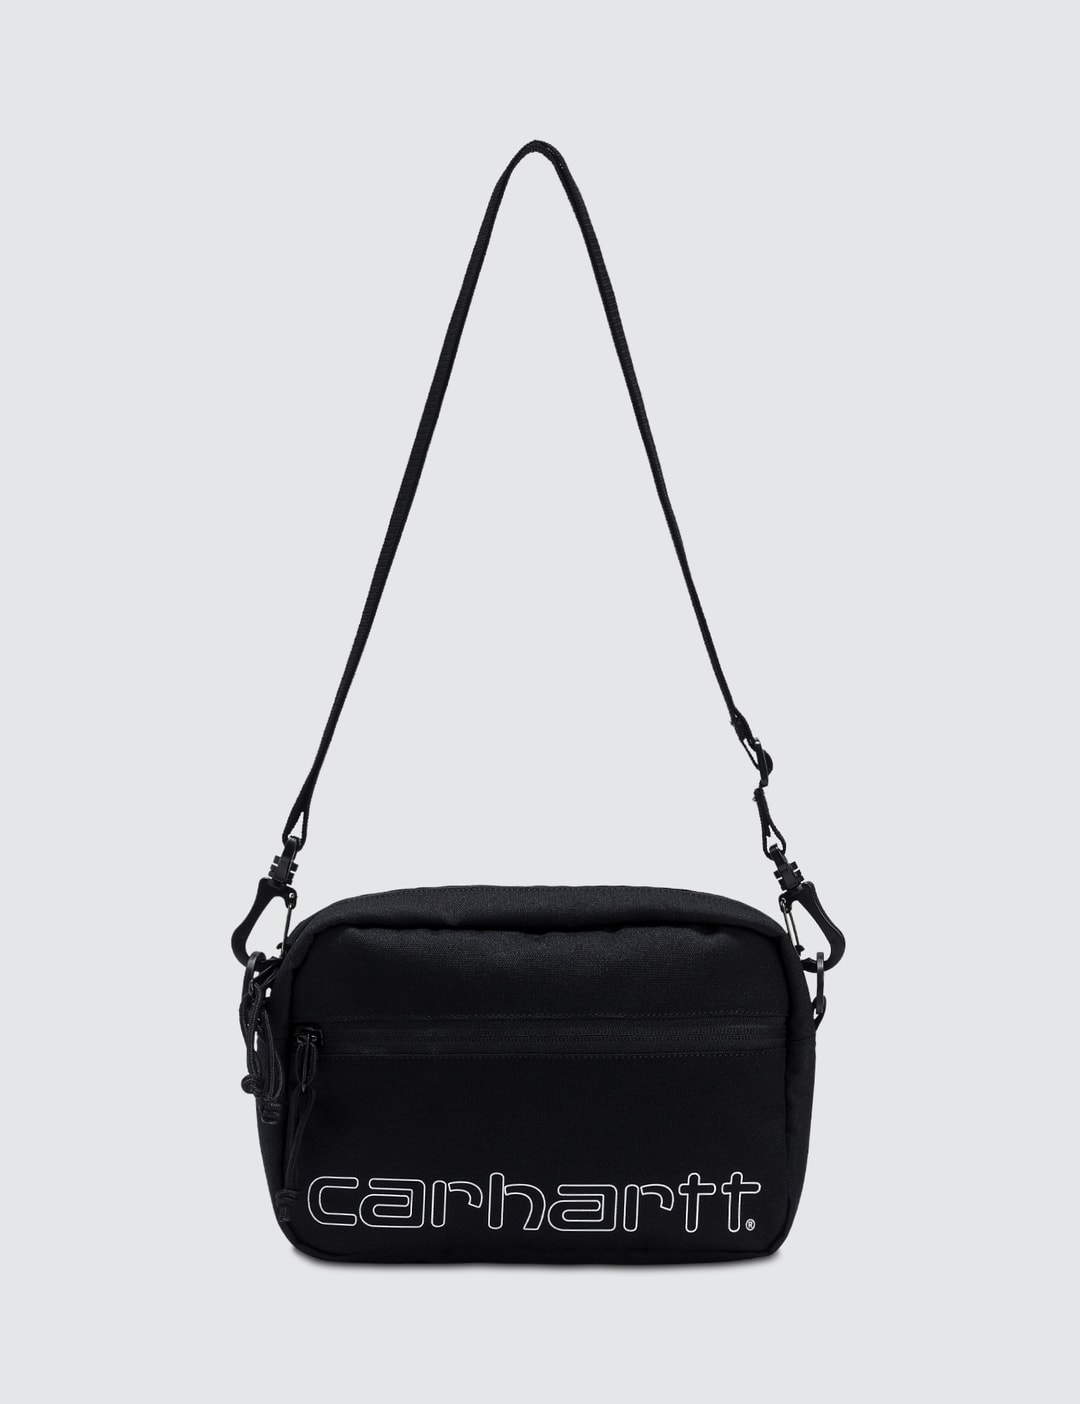 Carhartt Team Script Bag - The Essence of Style and Elegance!